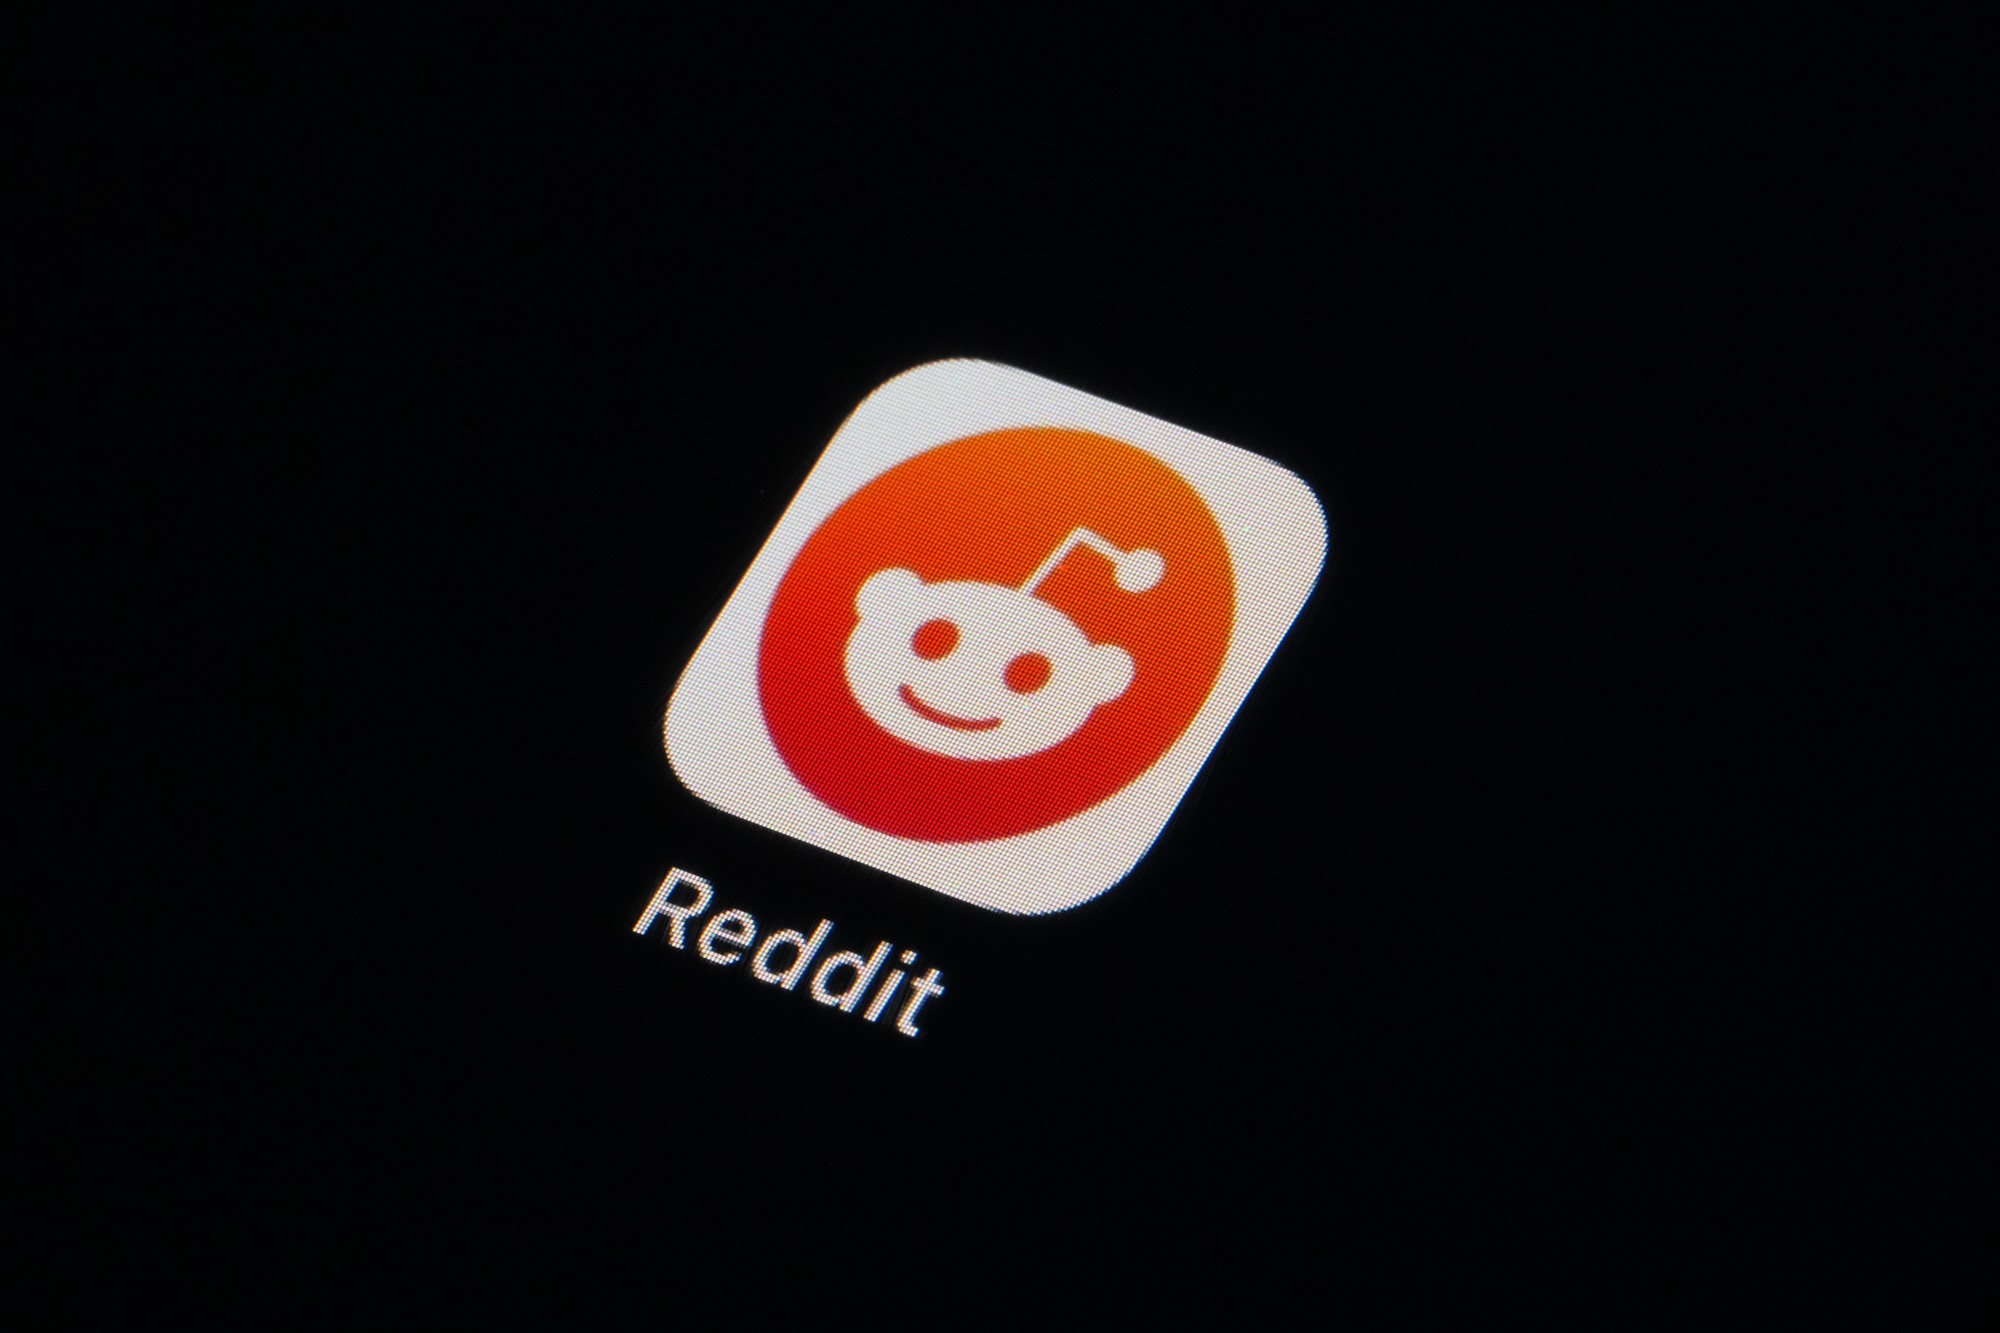 The Reddit logo on iOS, displayed on a screen